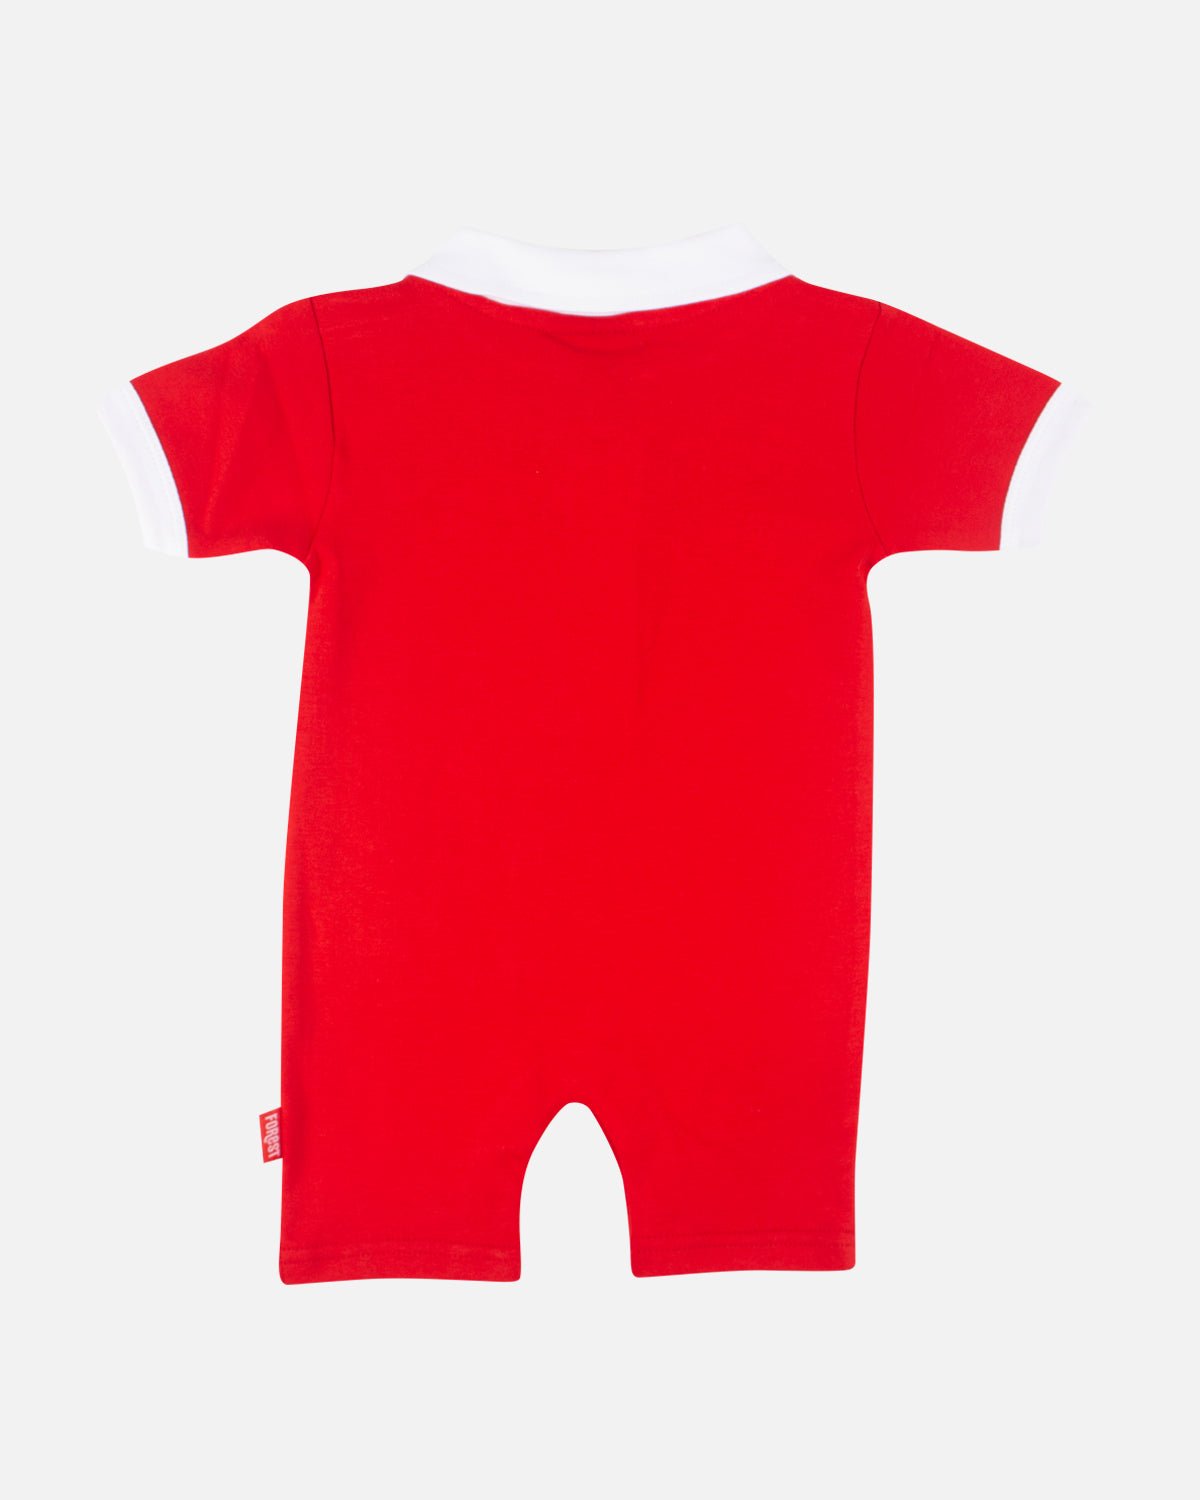 NFFC Red Baby Romper - Nottingham Forest FC